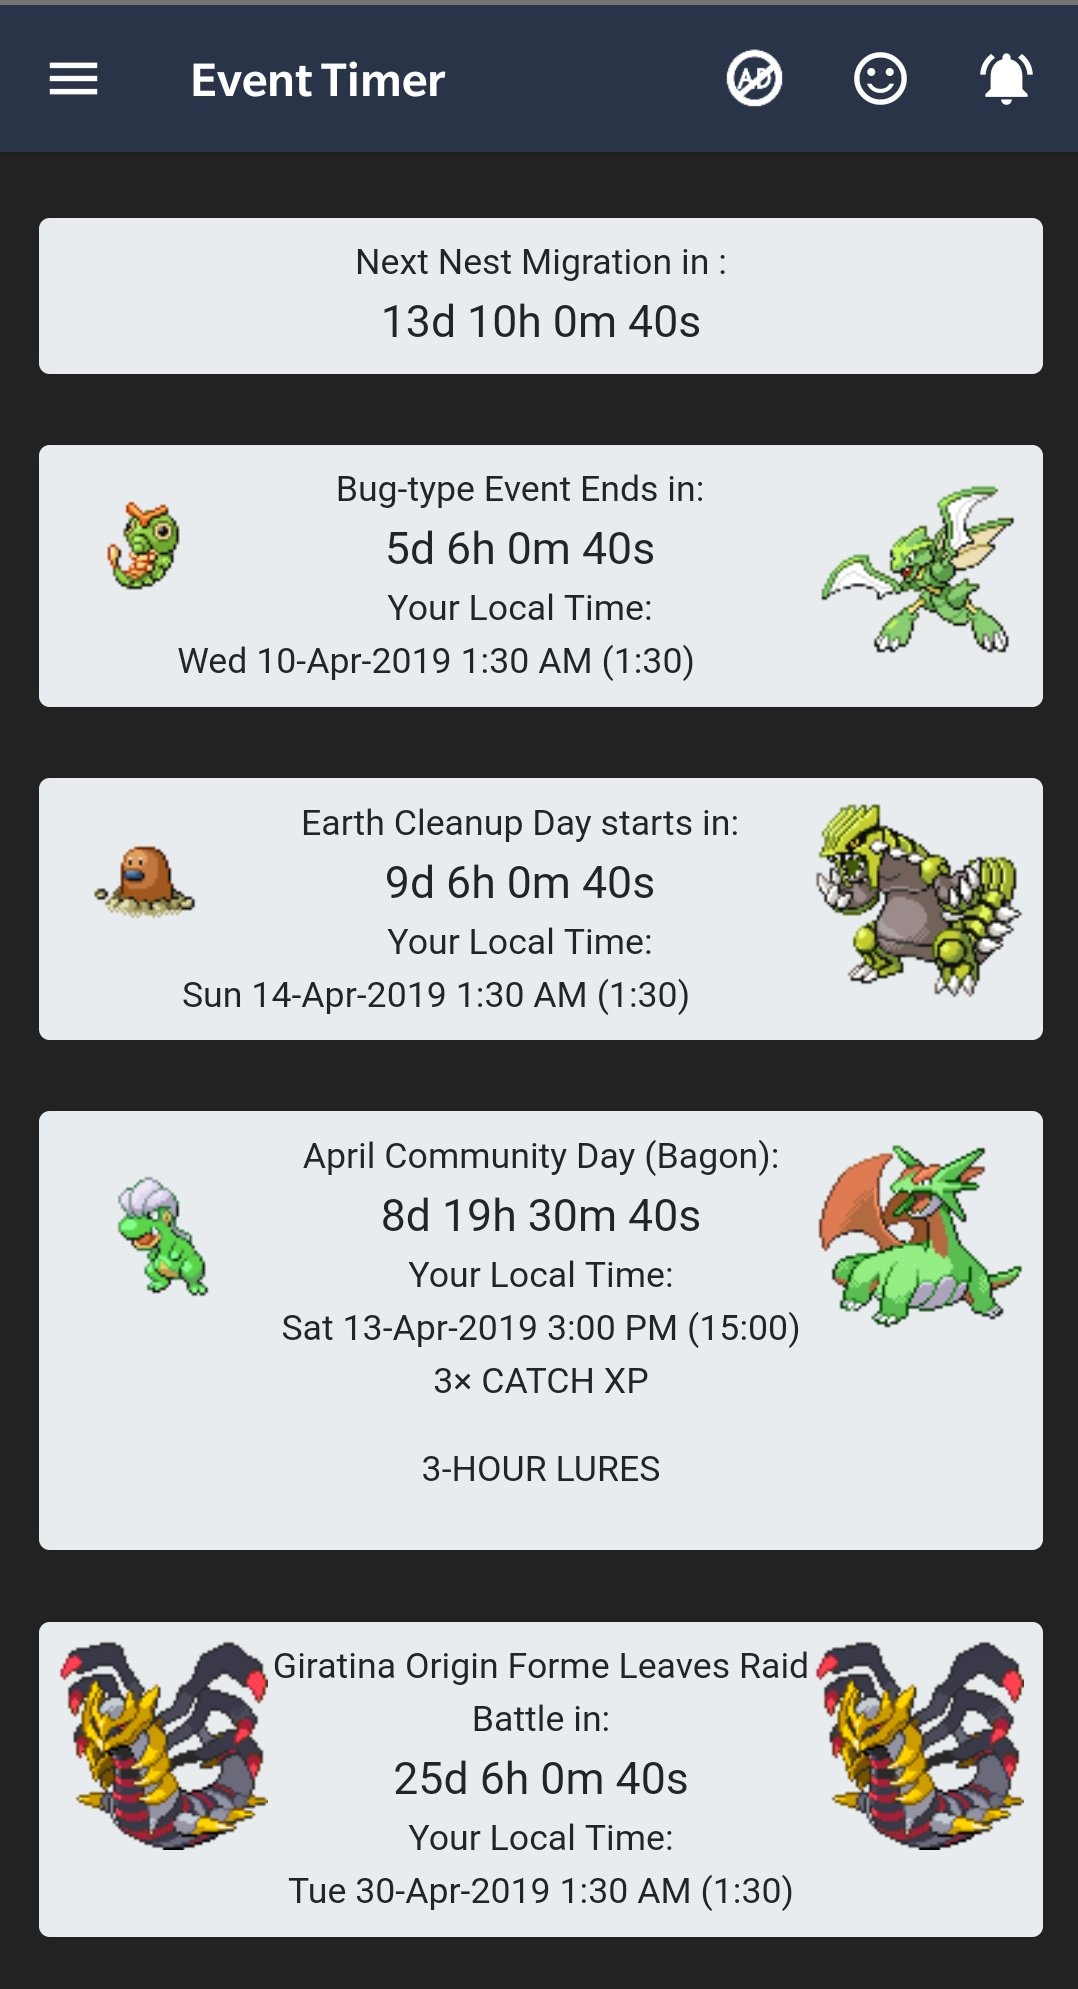 GO Field Guide on Twitter: "@PokemonGoApp A Event Timer with Event Notifications will help you to remember all important dates! All Events Countdown Timer at GO Field Guide 👉 https://t.co/0WyvruZYmJ https://t.co/SxZYOPAZ3f" /